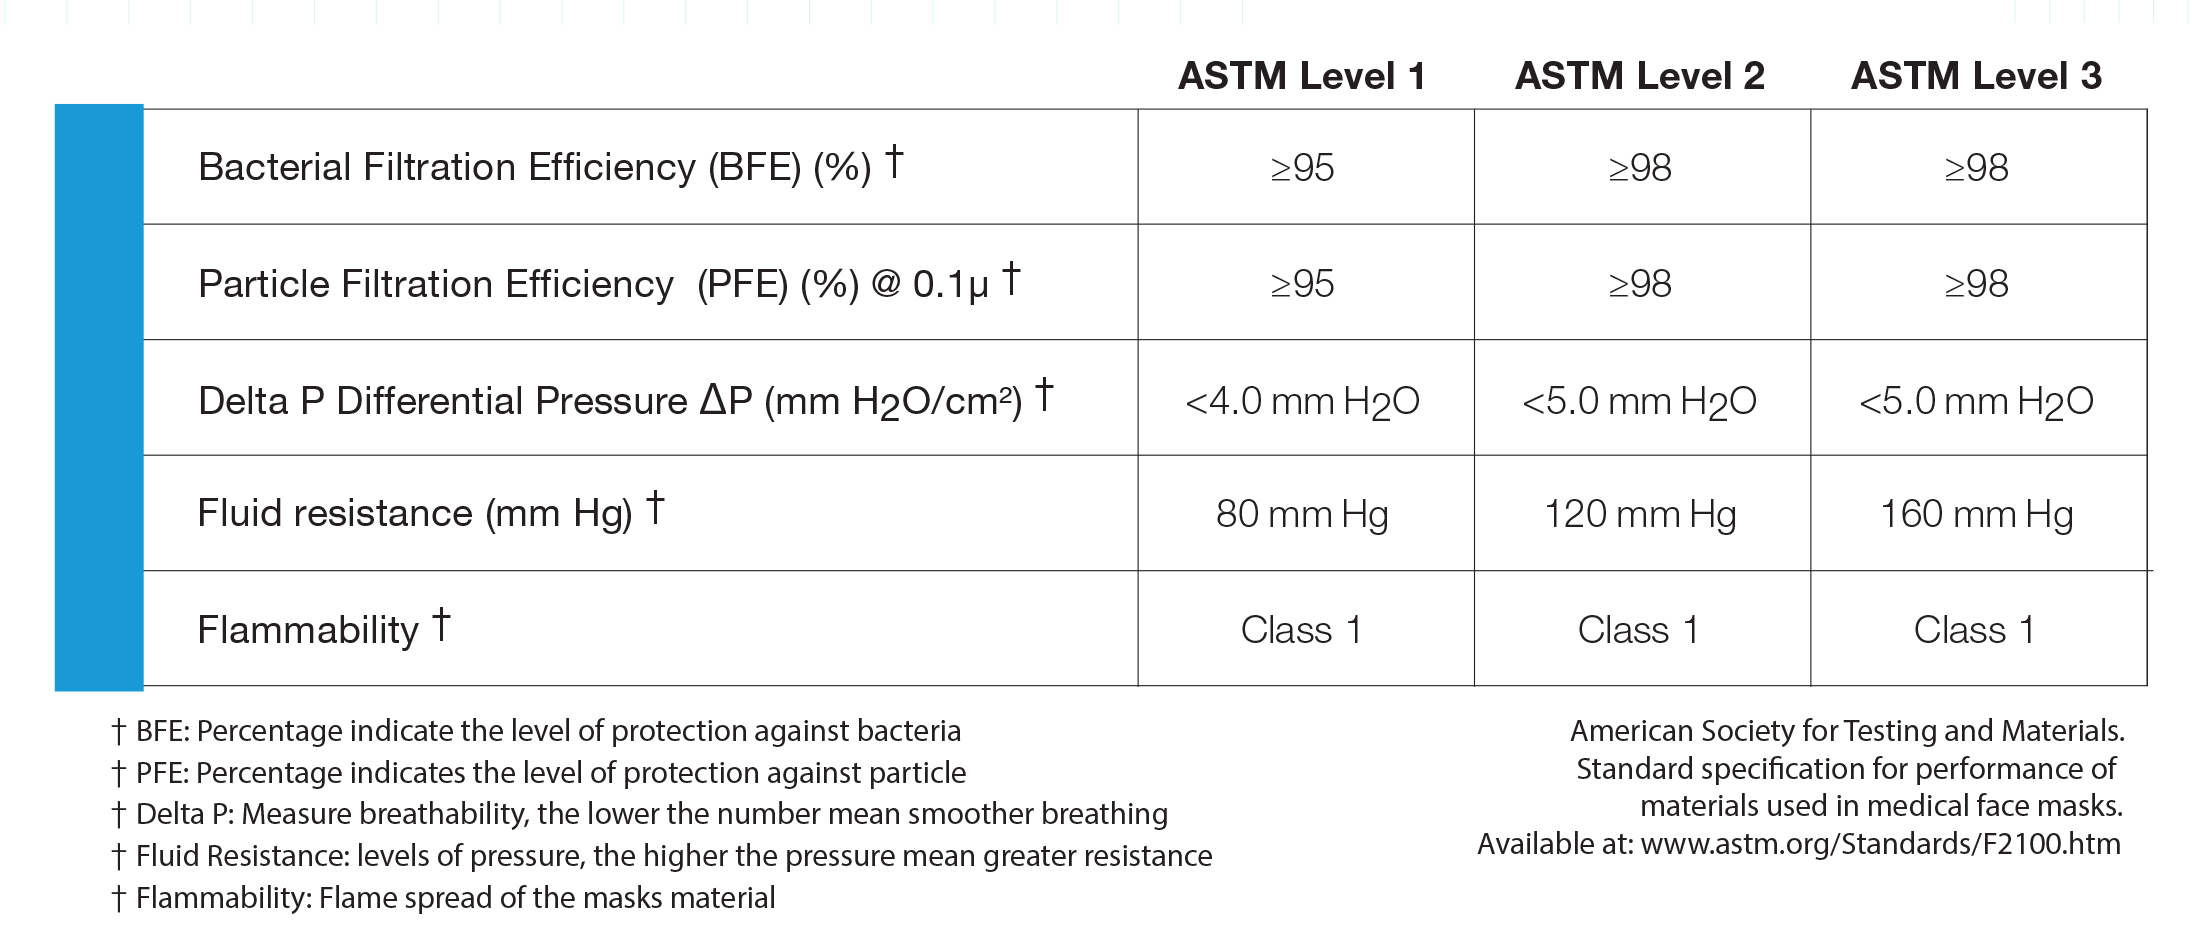 ASTM Level 1, 2, 3, Masks – five key performance factors recognized by the FDA